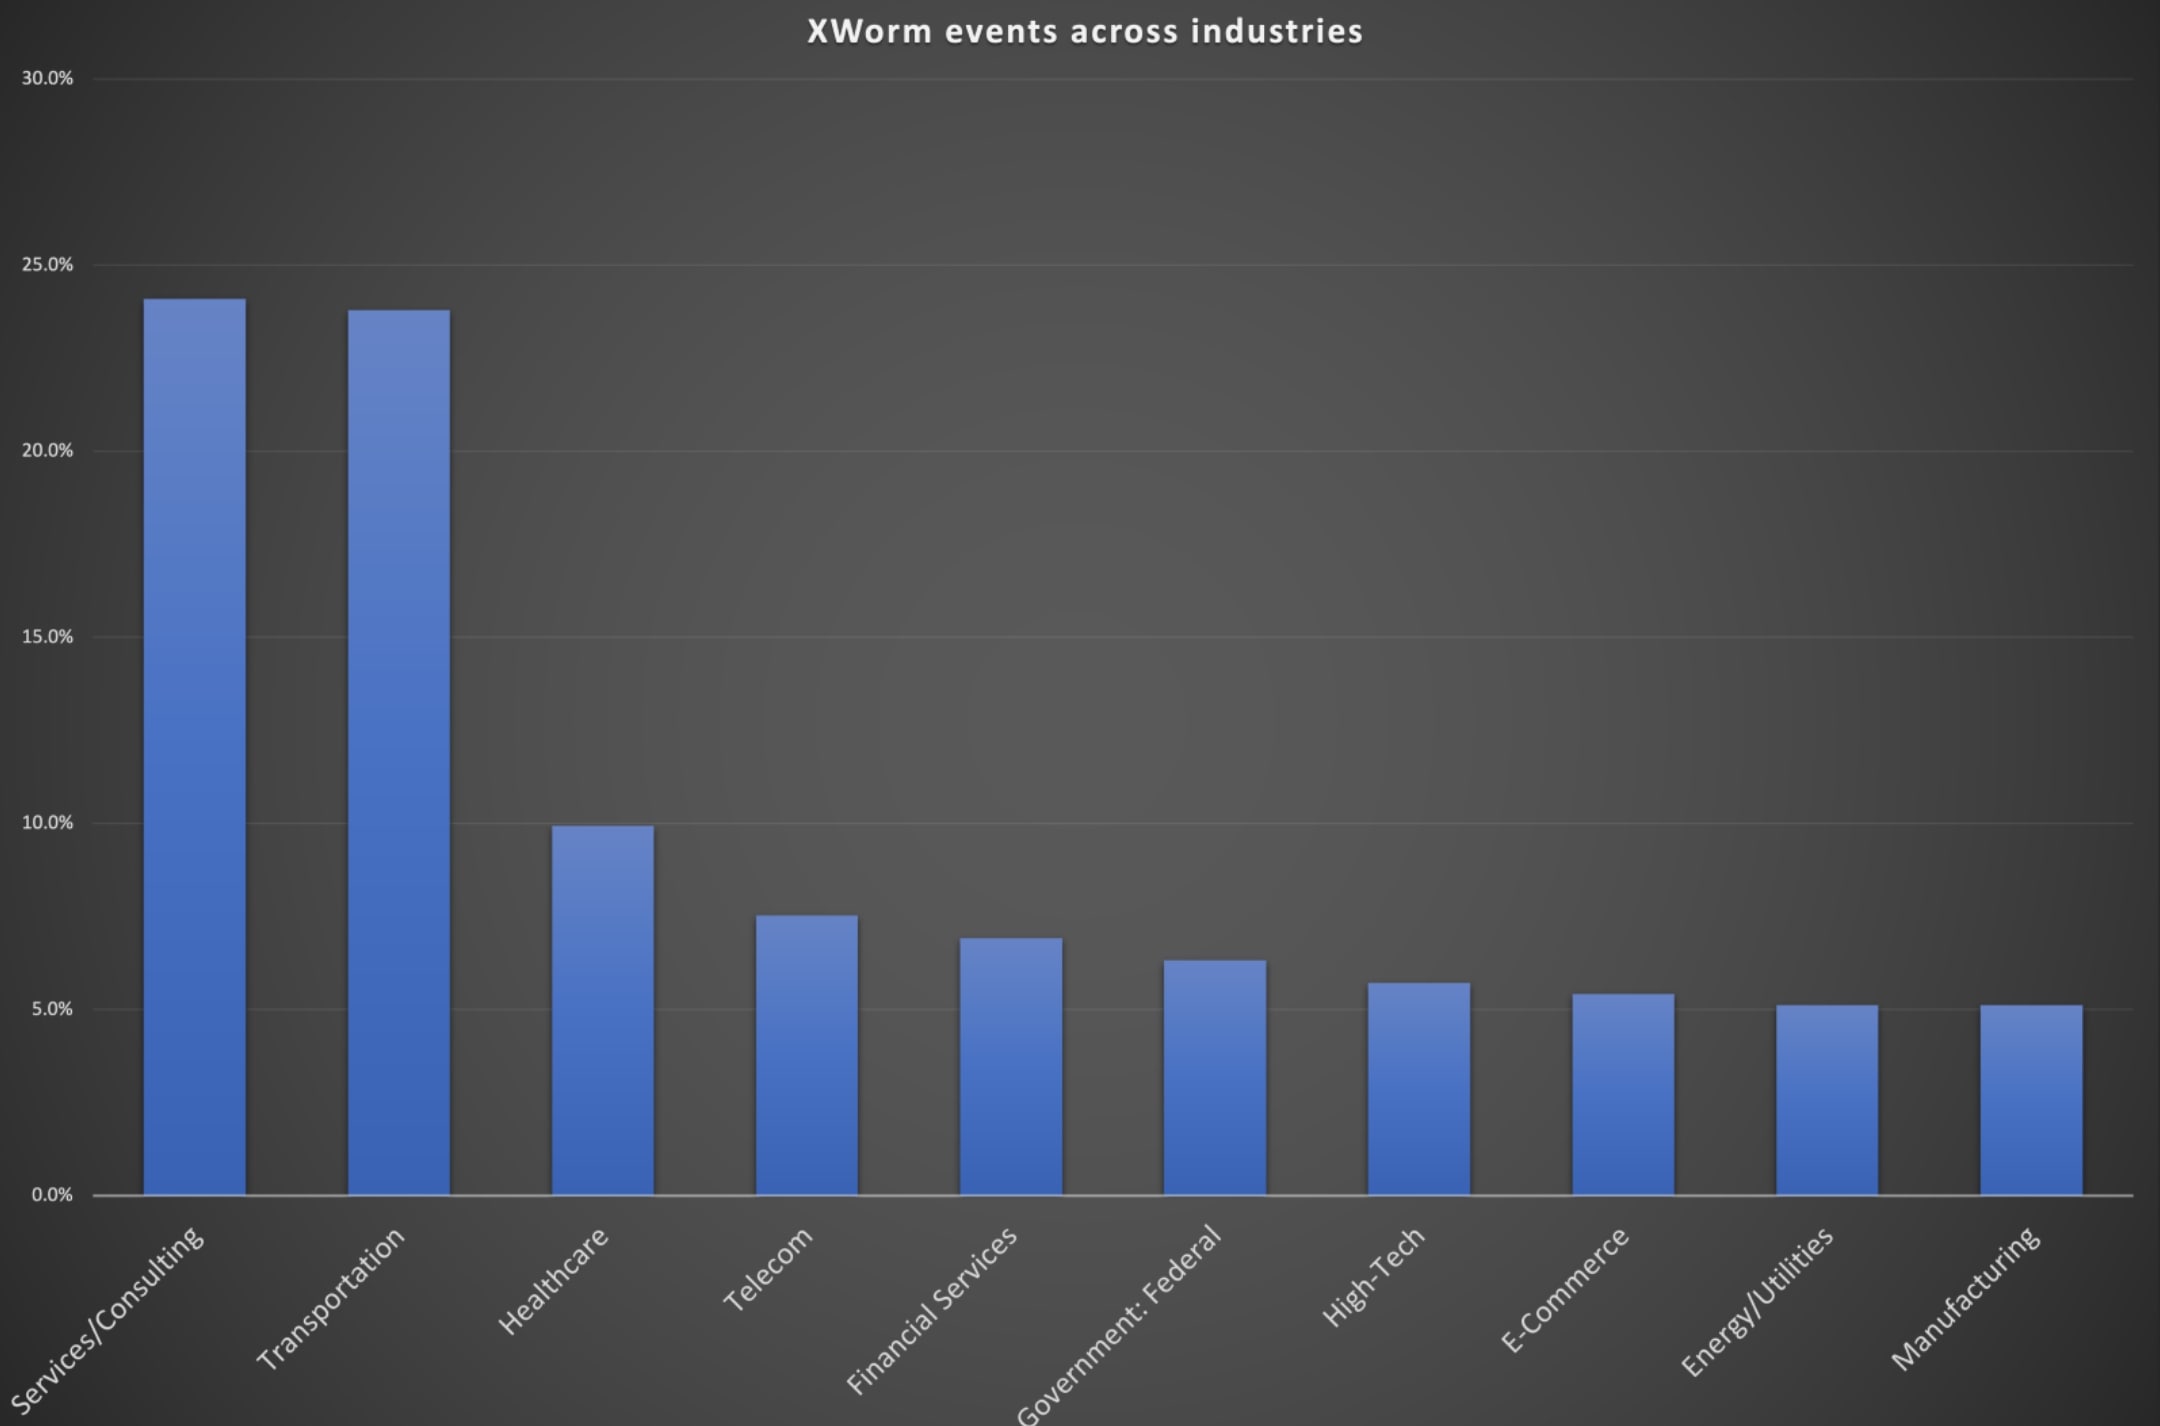 Fig 36. XWorm event detections by industry